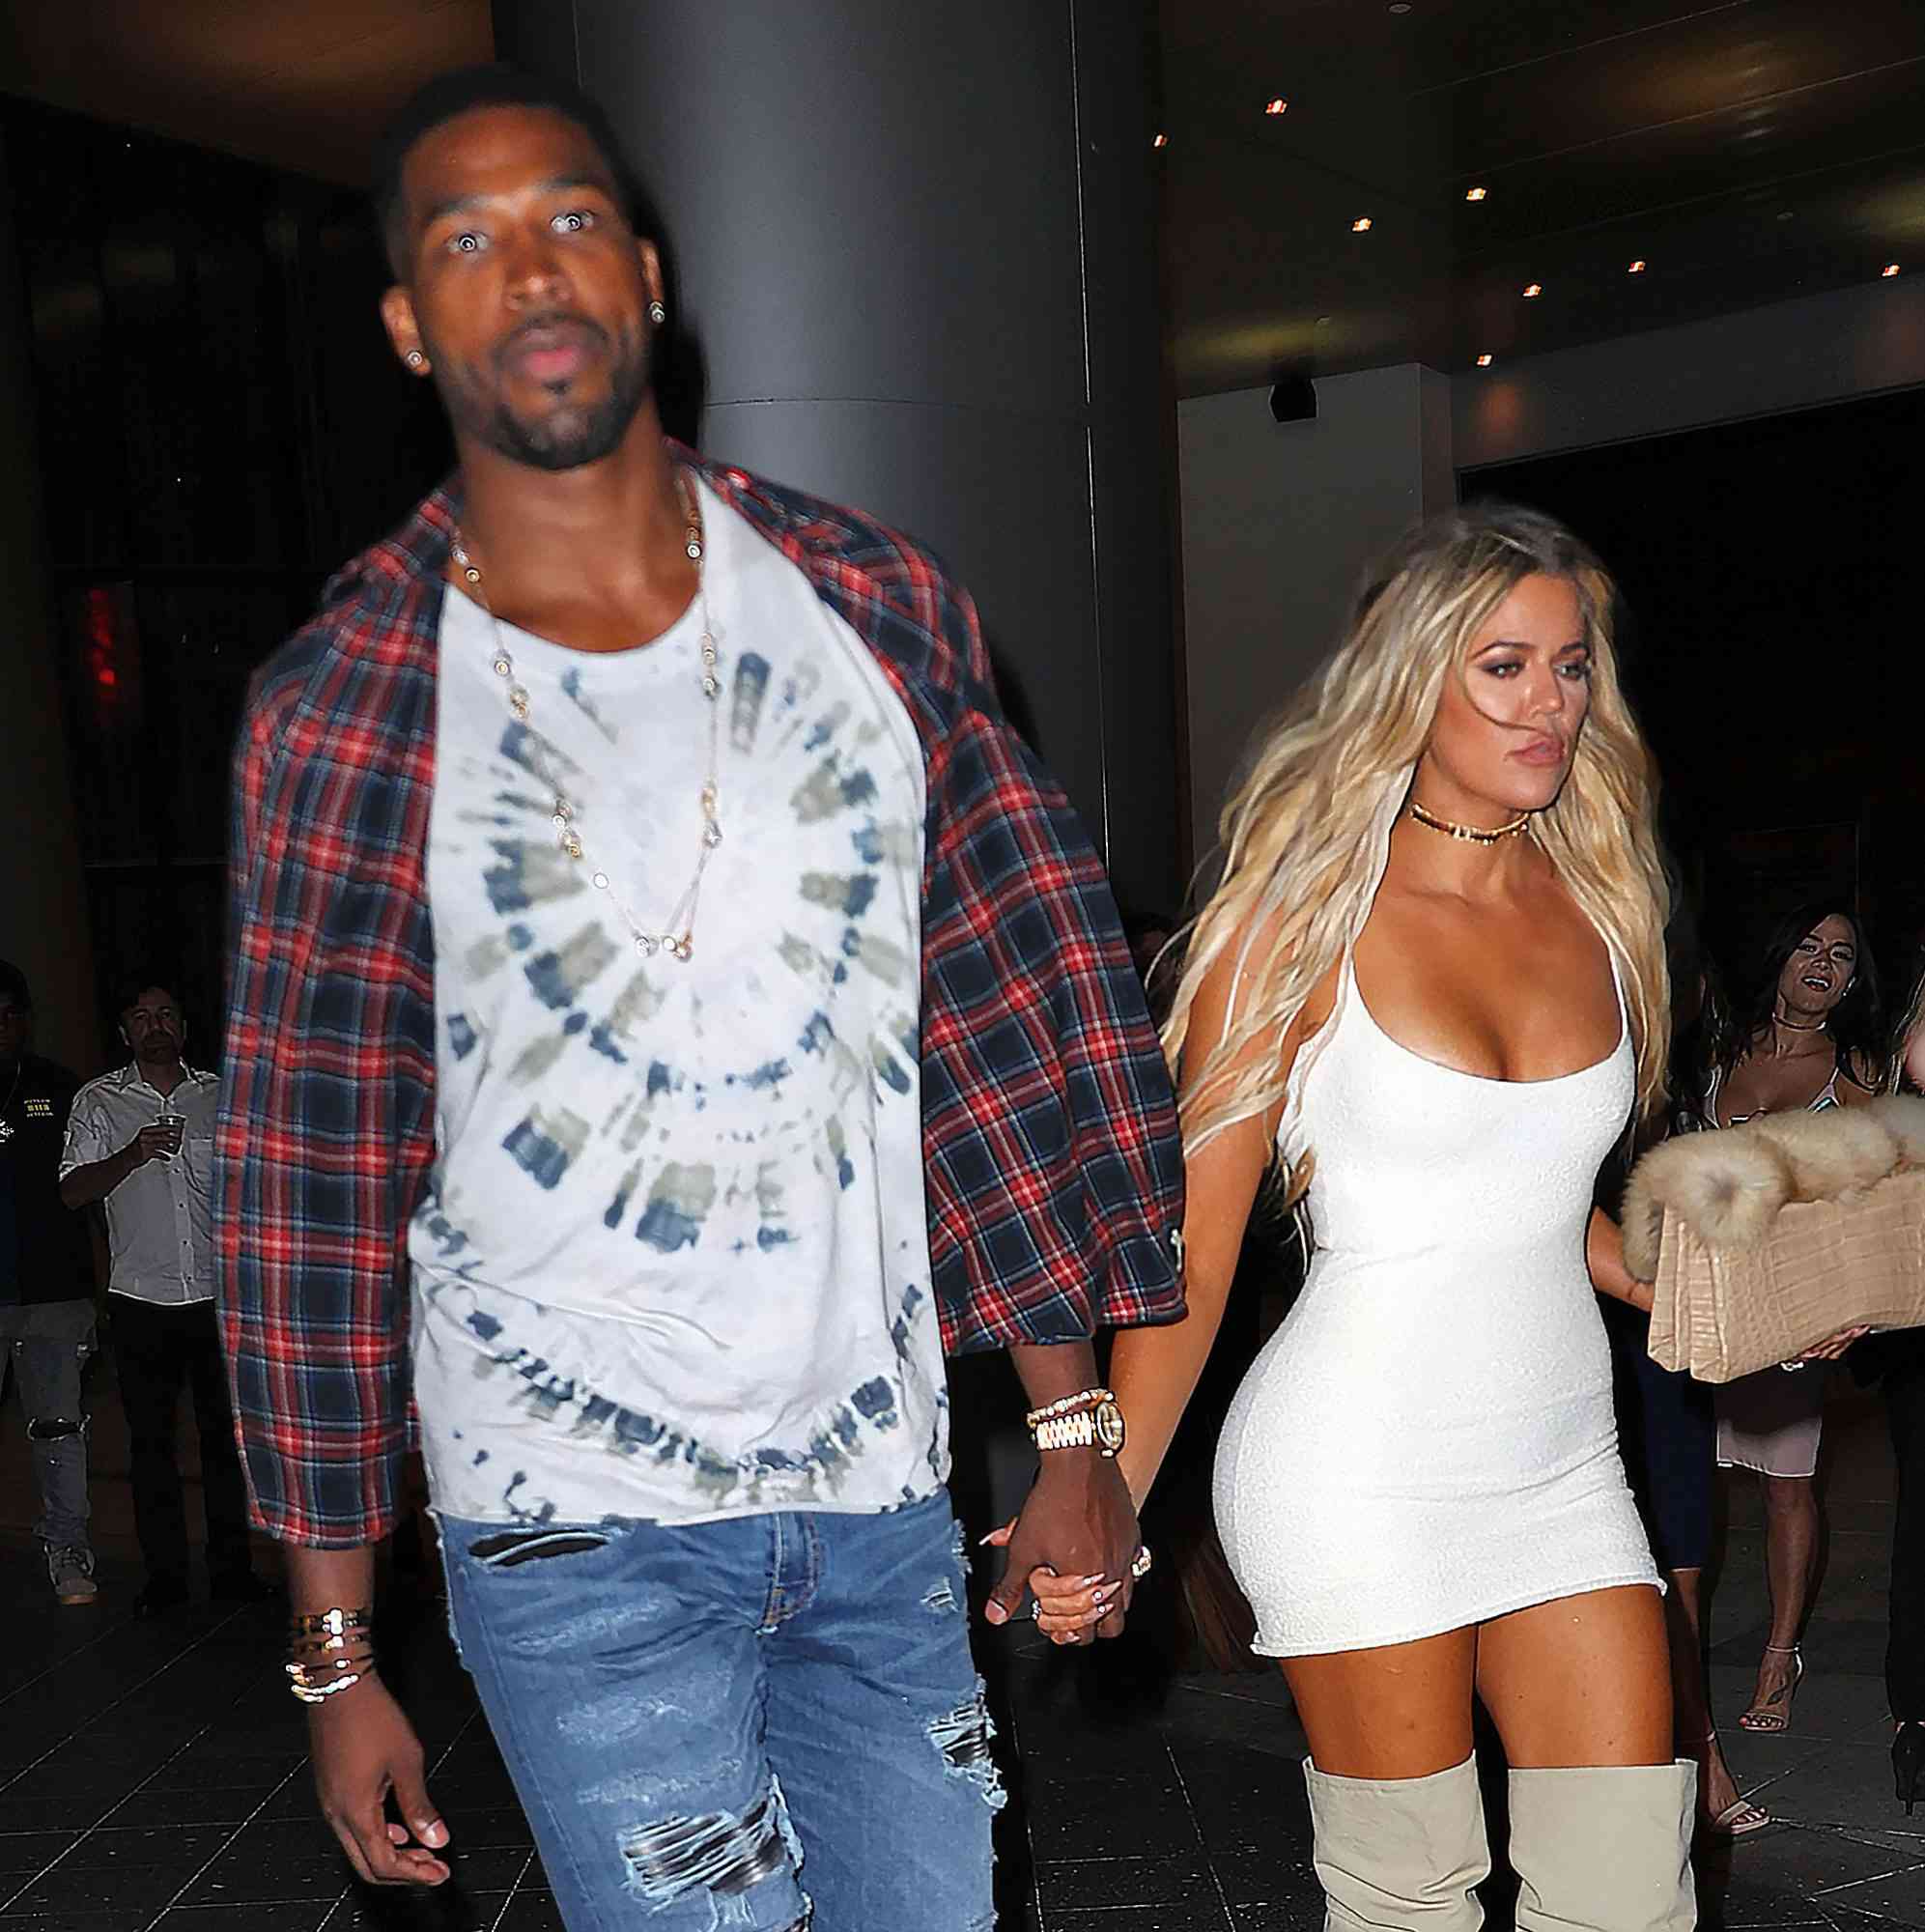 EXCLUSIVE: Khloe Kardashian and Tristan Thompson hold hands after dinner at Zuma in Miami